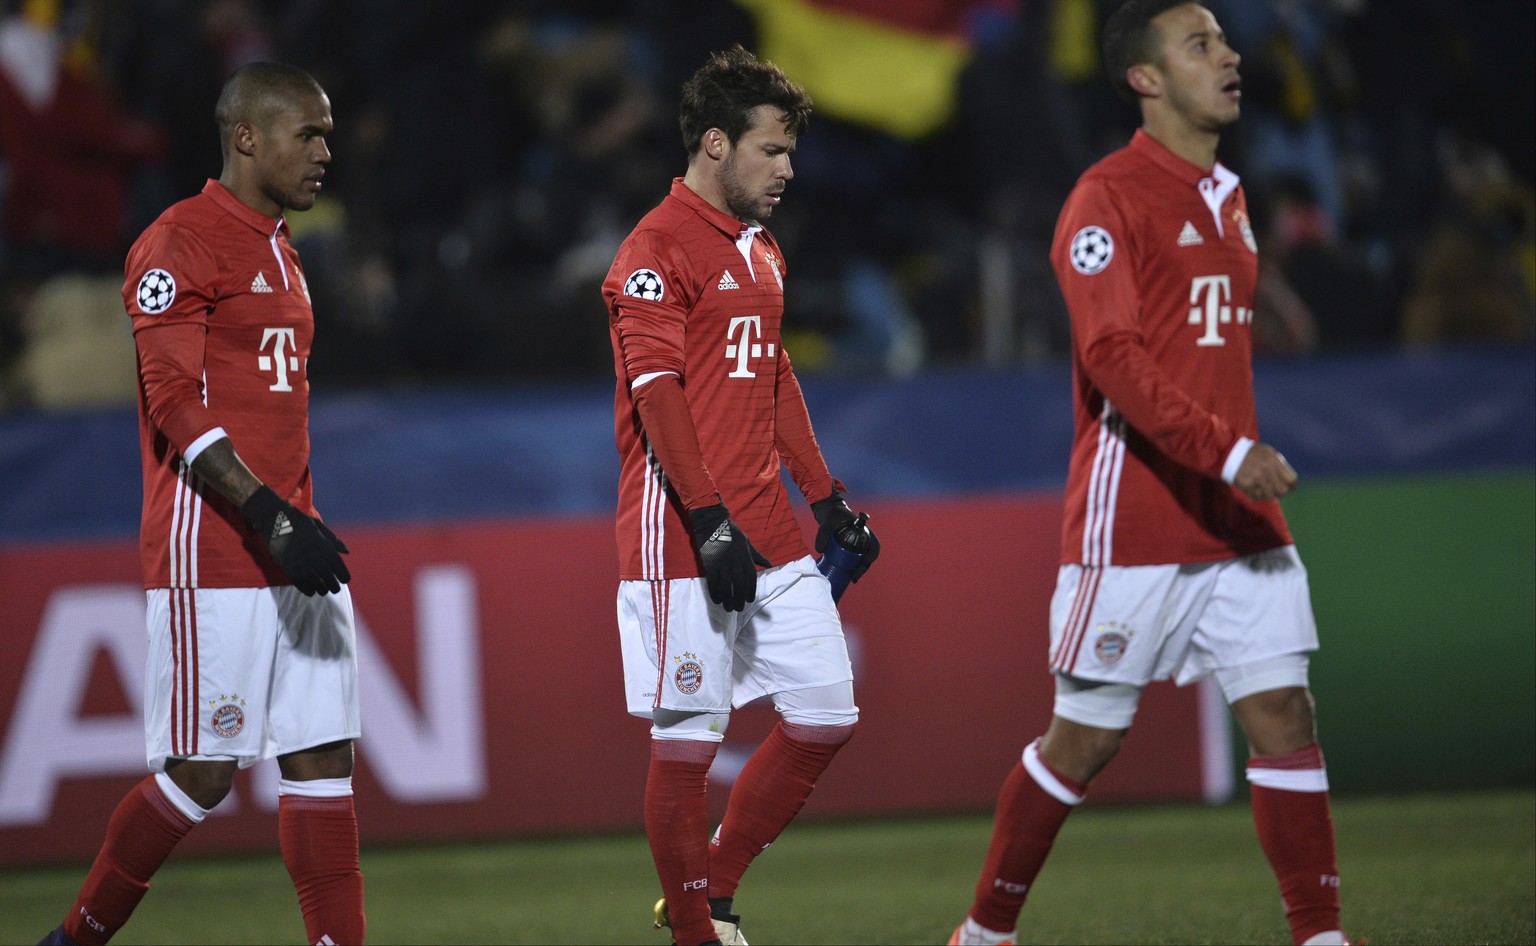 Bayern Munich&#039;s players leave the pitch after their team&#039;s 3-2 loss in the Champions League Group D soccer match between Rostov and Bayern in Rostov-on-Don, Russia, Wednesday, Nov. 23, 2016. ...